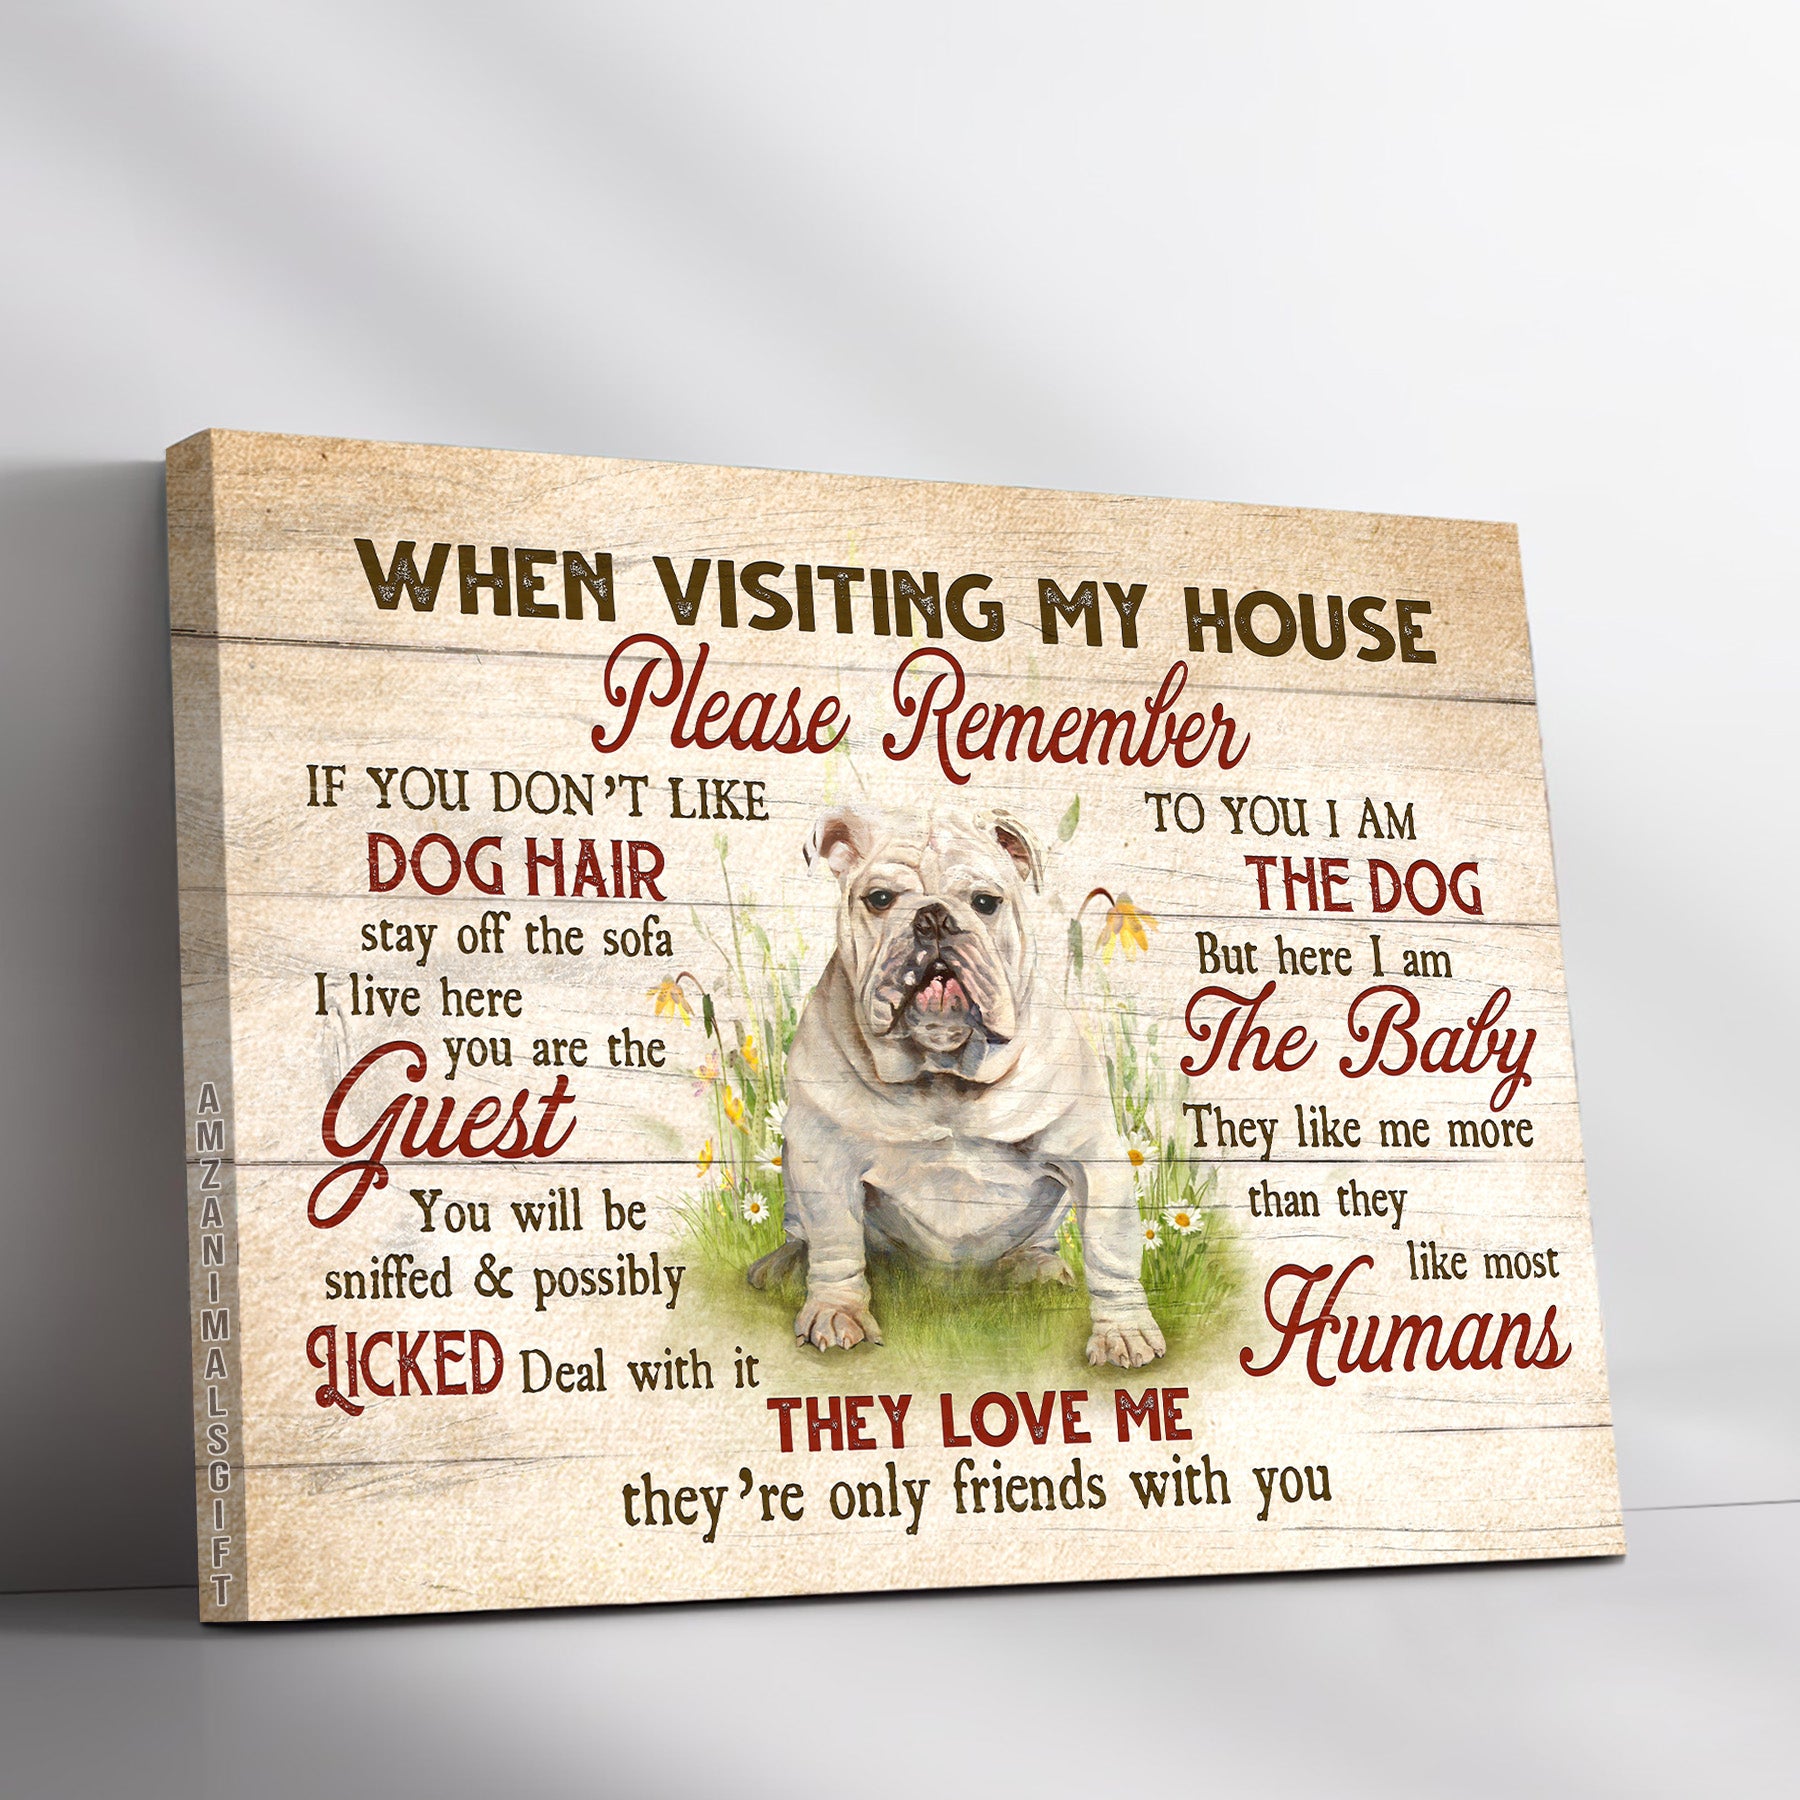 English Bulldog Premium Wrapped Landscape Canvas - English Bulldog, Grassland, They Love Me, They're Only Friends With You - Gift For Bulldog Lovers